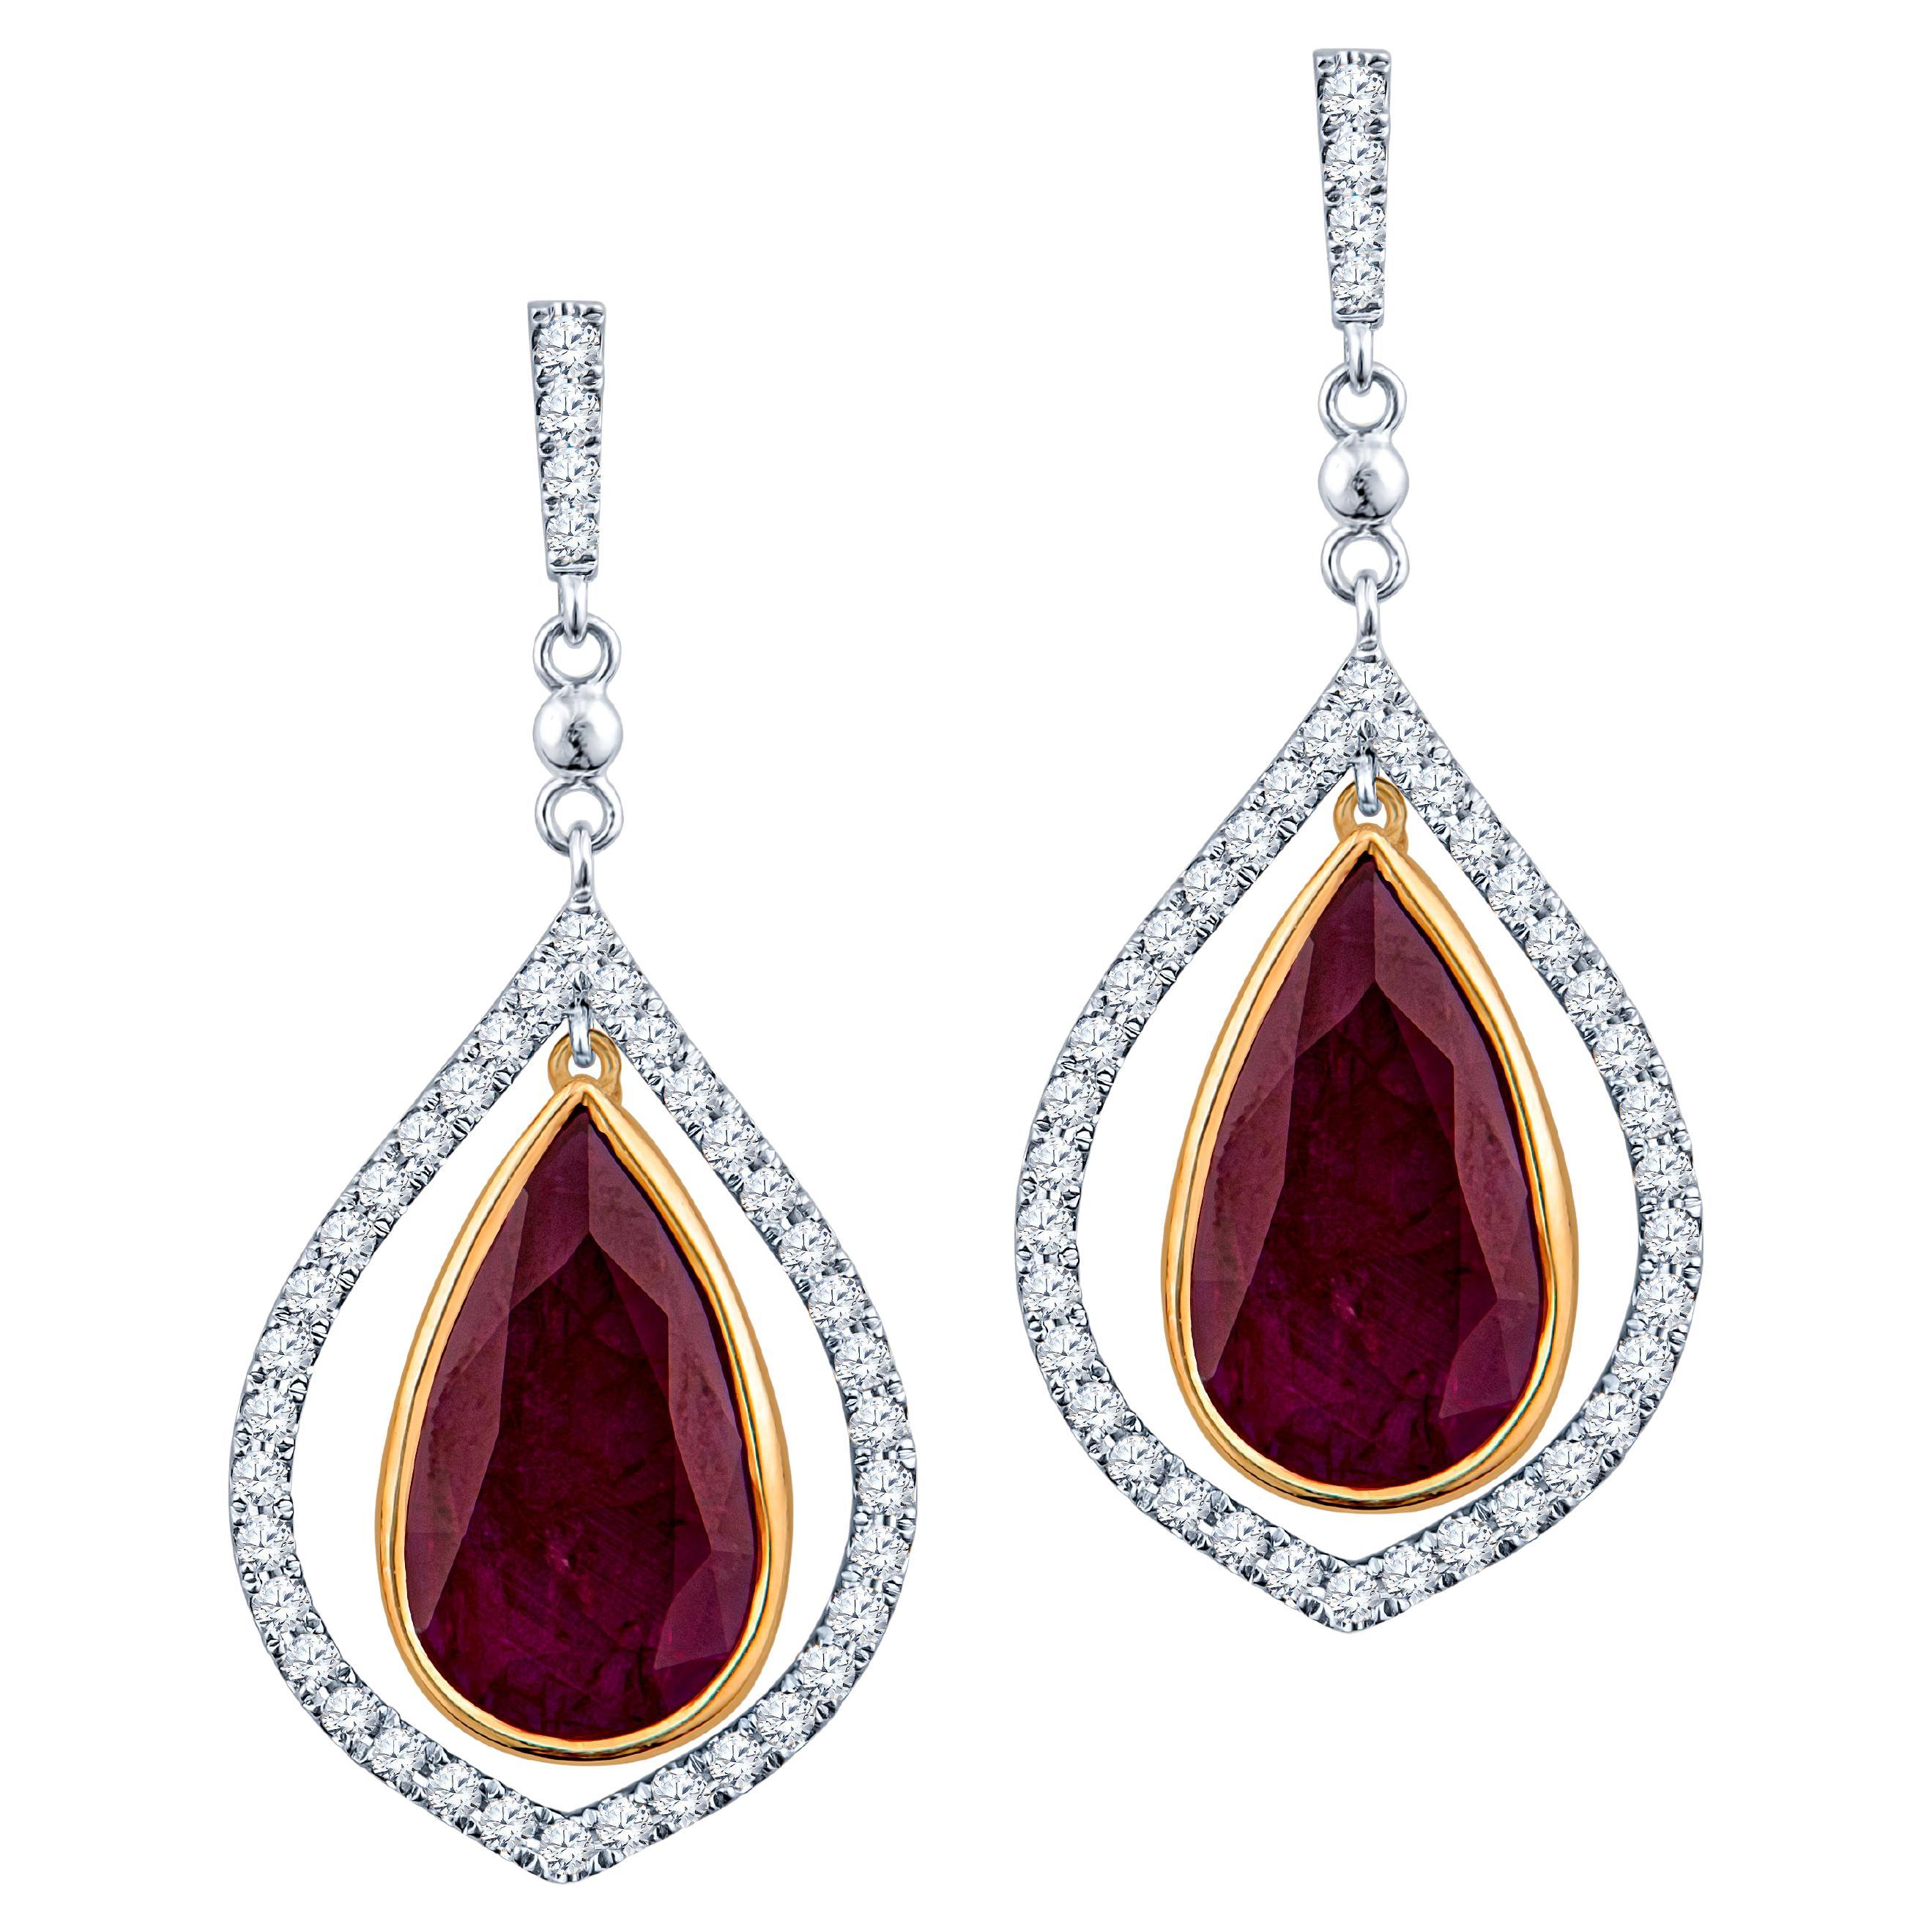 7.75ctw Pear Shaped Natural Rubies with 0.80ctw Diamonds, 14K Rose & White Gold For Sale